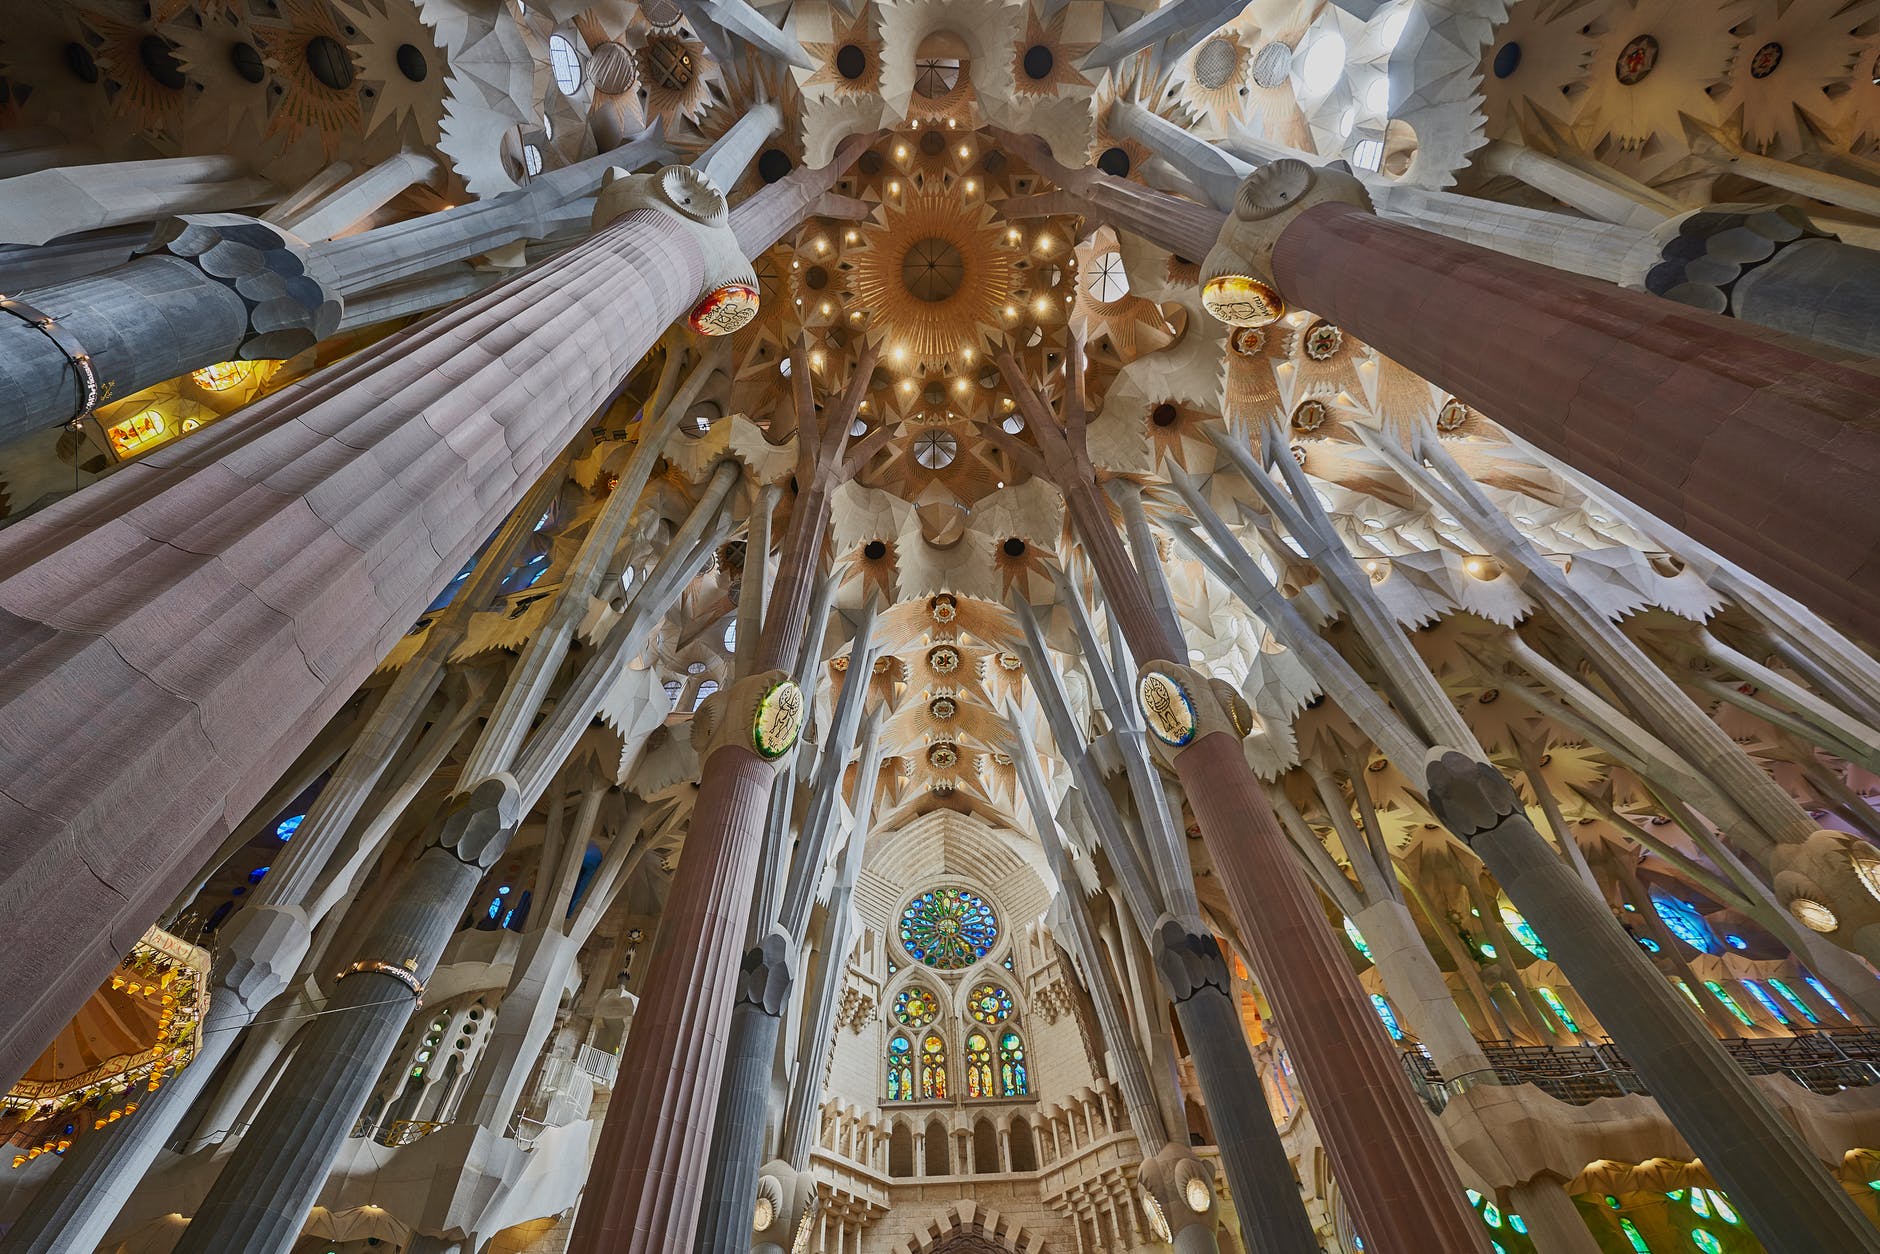 Unfinished Sagrada Familia Finally Gets Building Permit After 137 Years ...